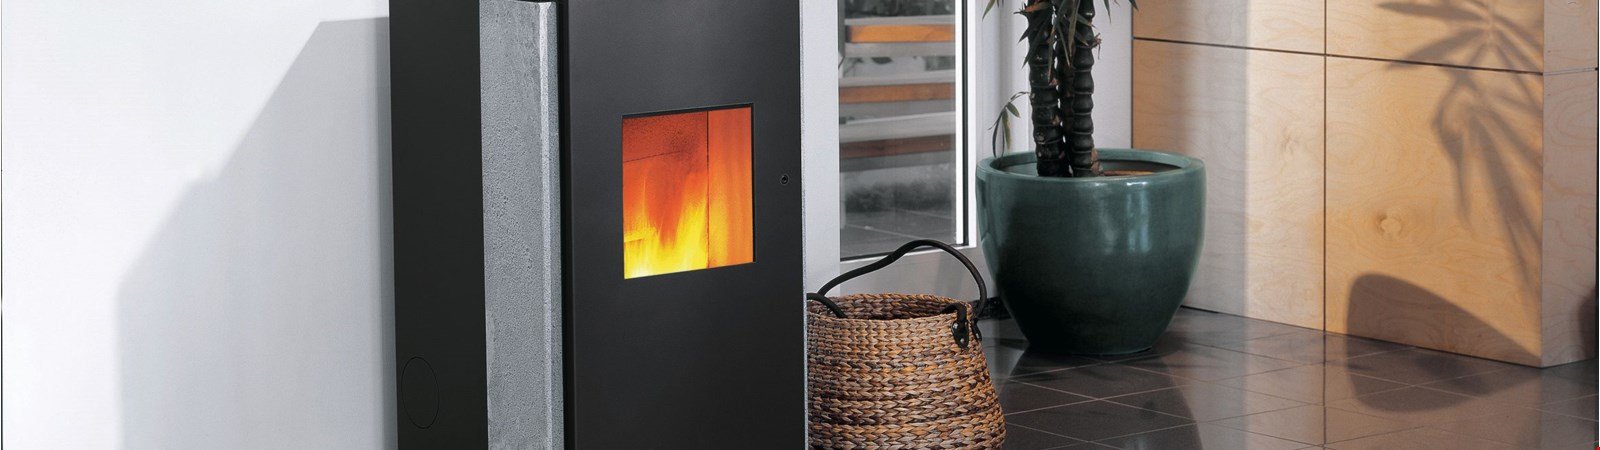 Buy pellet stove: Comfort and atmosphere on the stove